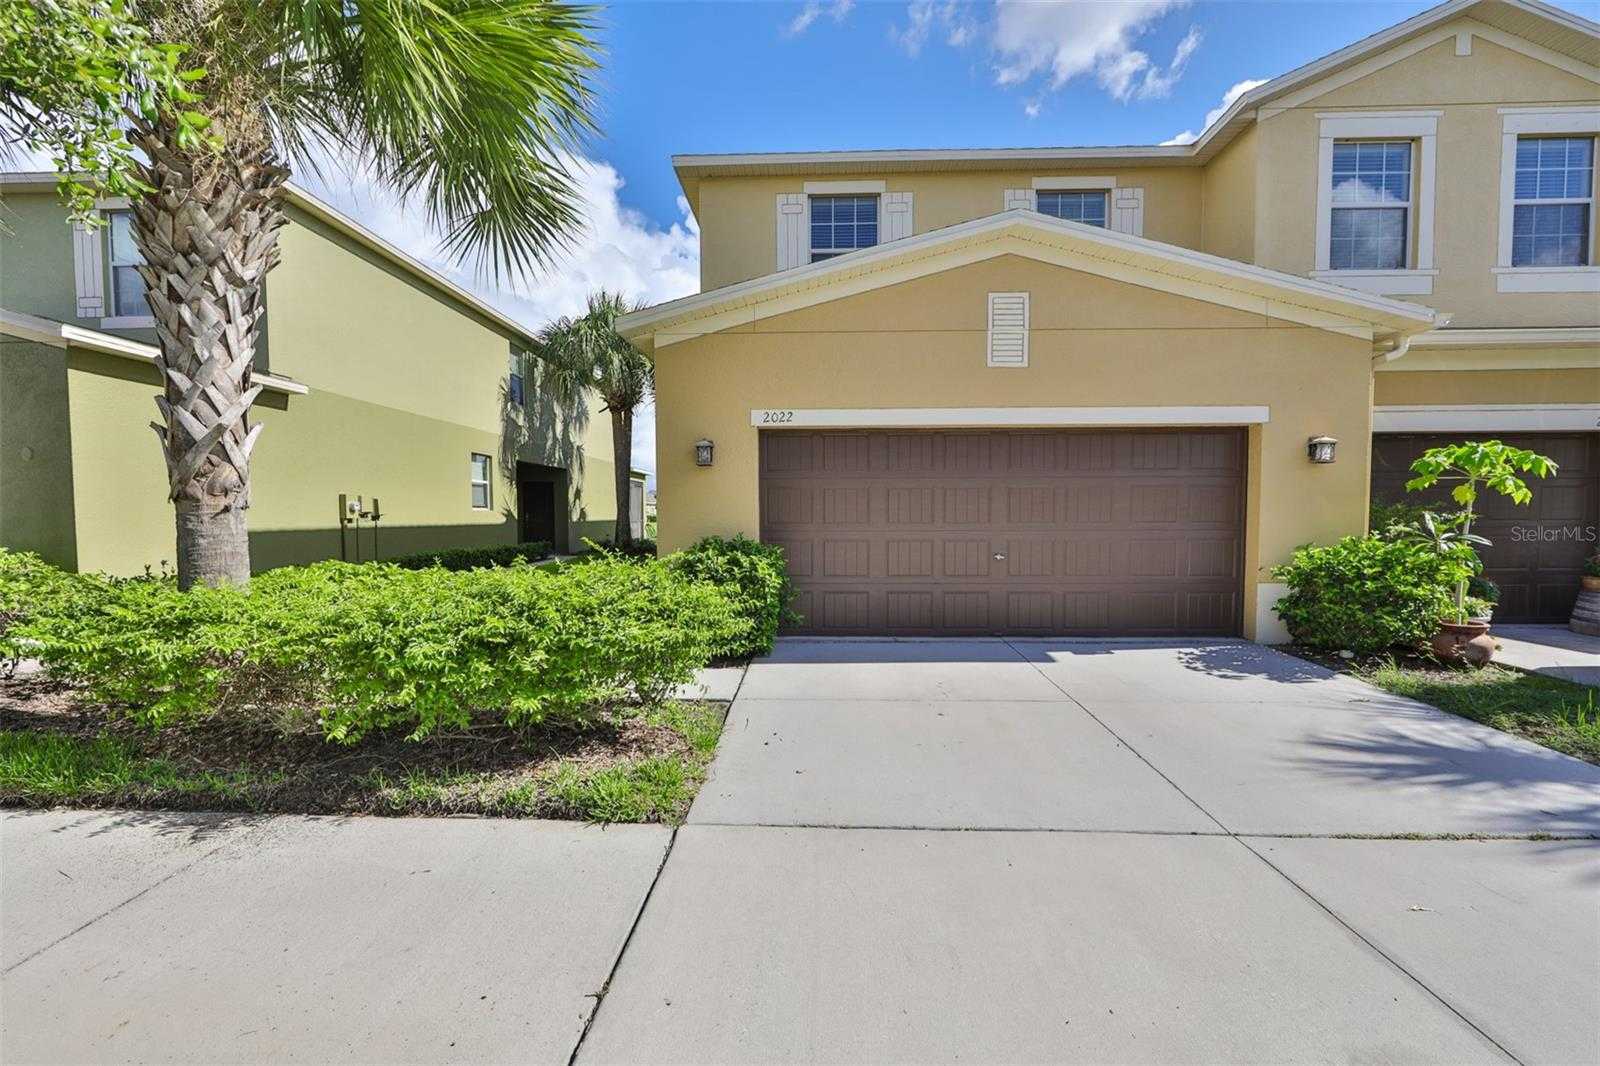 View RUSKIN, FL 33570 townhome